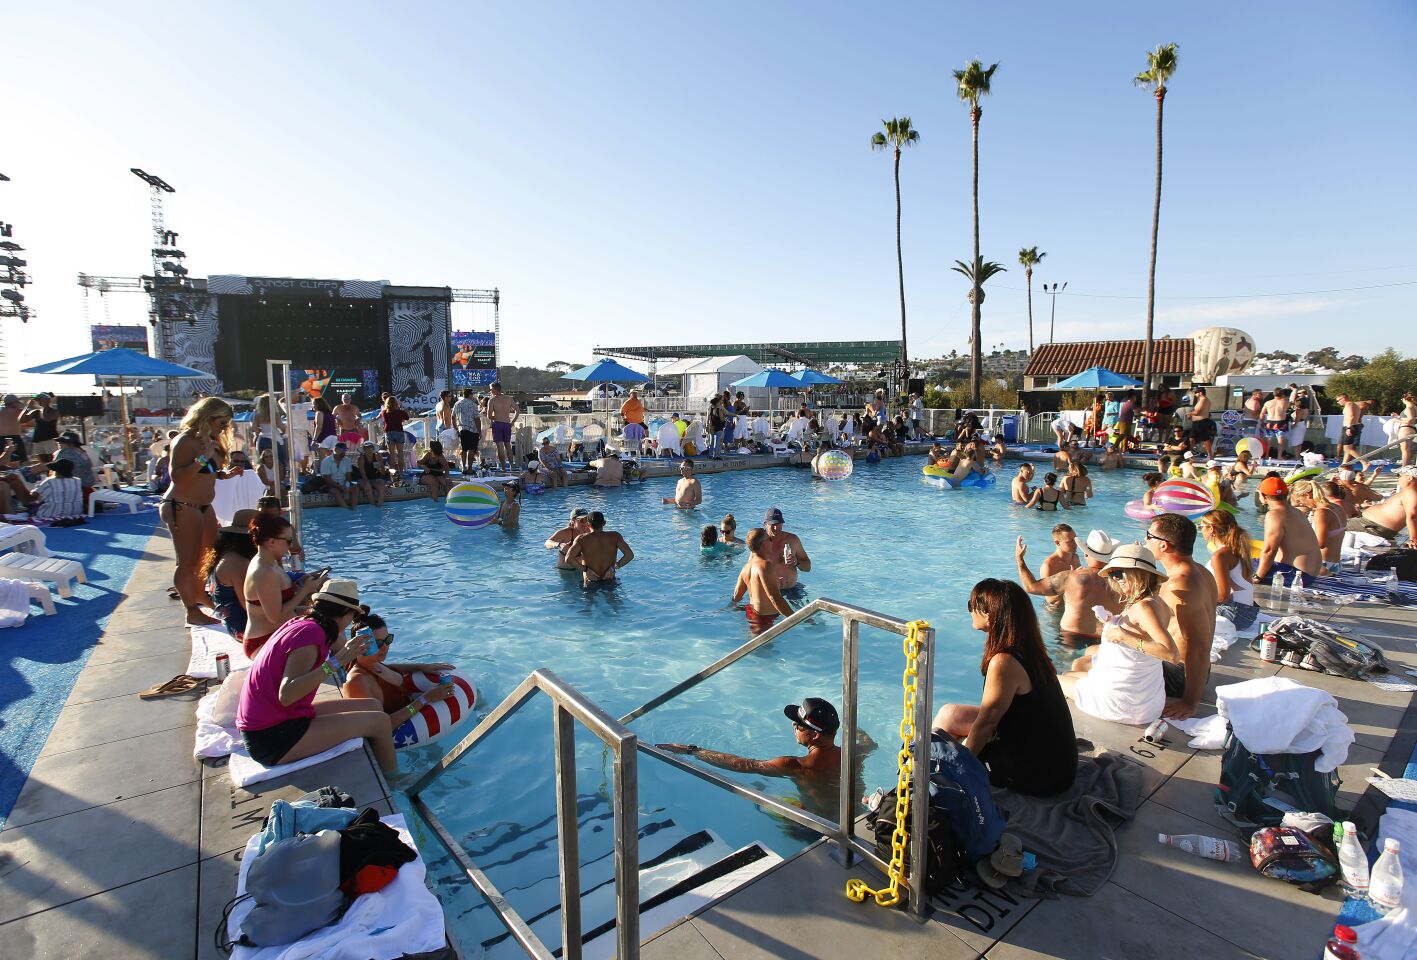 Concert goers relax at the Bask Swim Club at KAABOO Del Mar on Sept. 14, 2019.